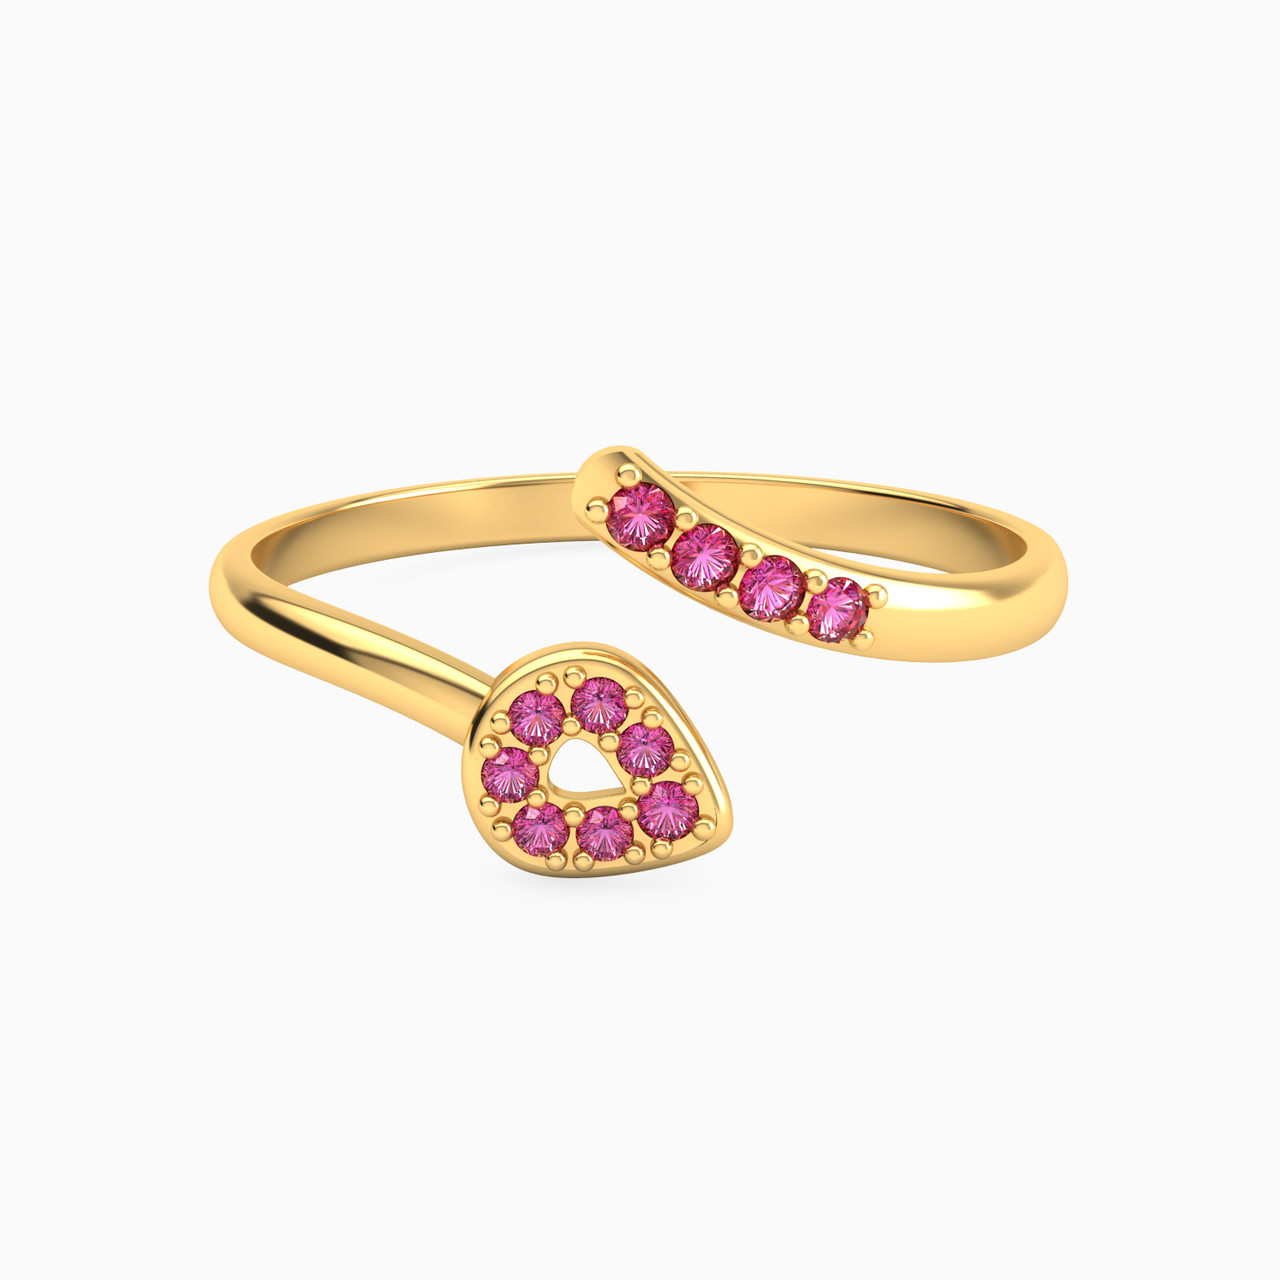 Pear Shaped Colored Stones Two-headed Ring in 18K Gold